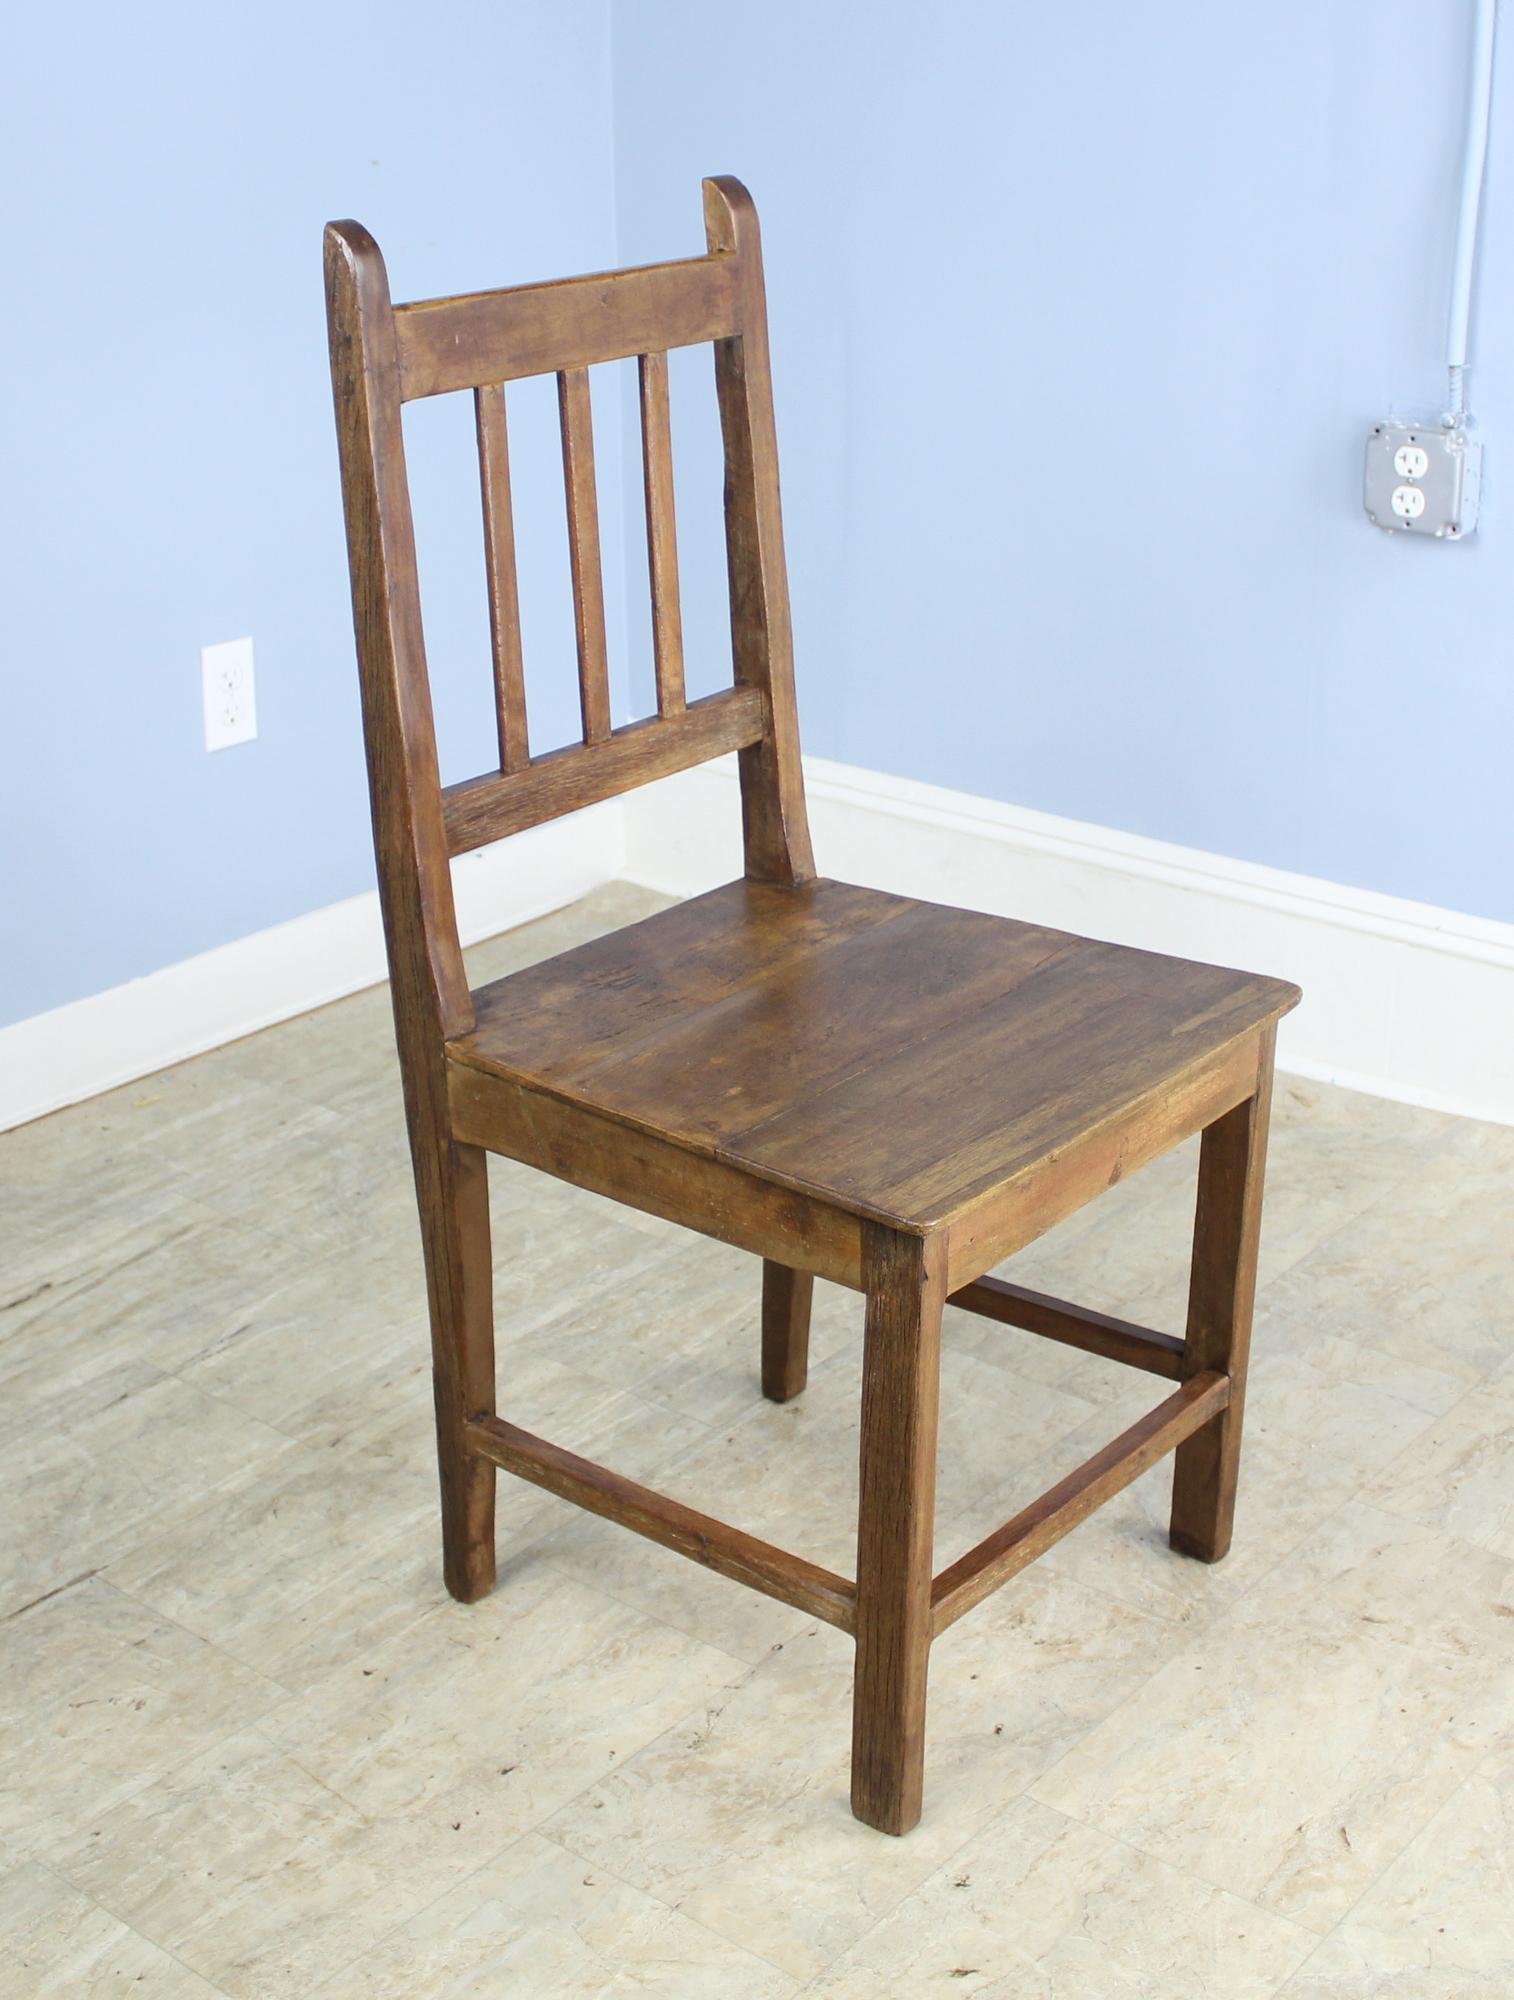 A charming set of English oak side chairs. A simple silhouette with lovely color and patina. The seats, pictured in images #6 and 7, have various degrees of wear, but all chairs are in sturdy good condition. Would look smart around a country farm